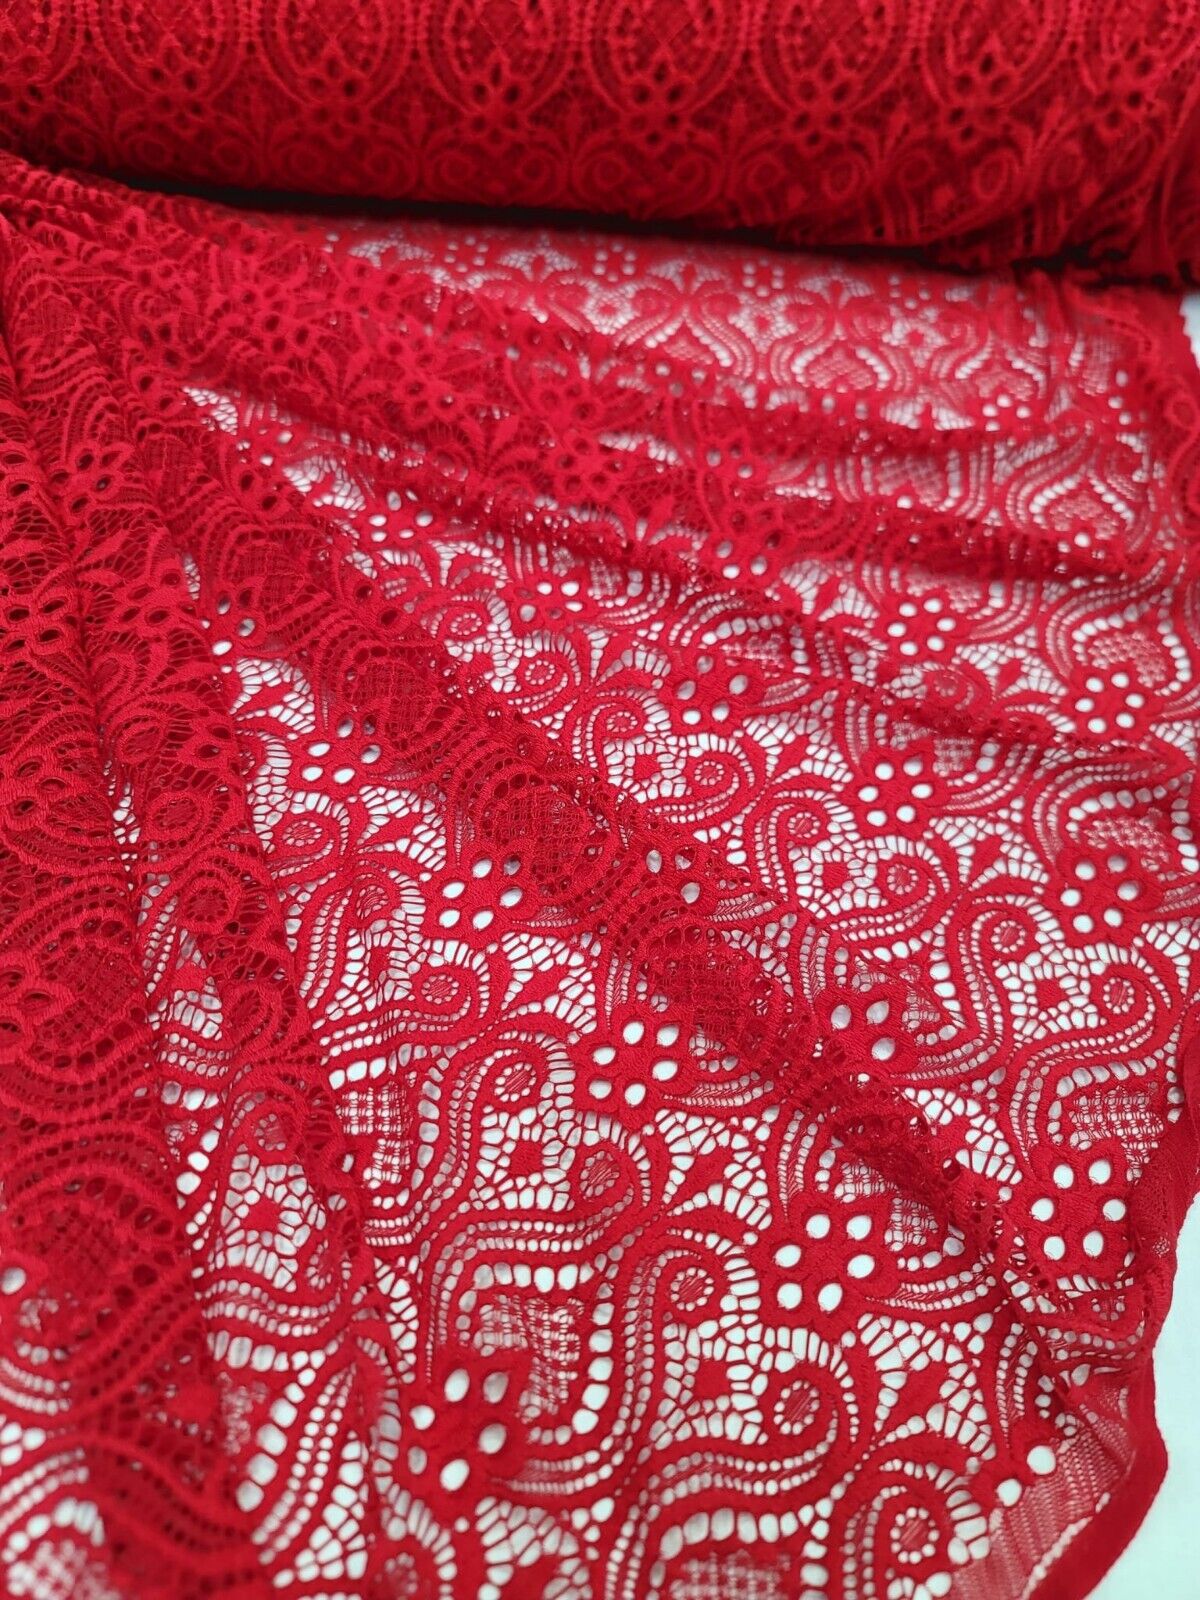 Red Mesh Lace Fabric - Bridal Decoration - Sold by the Yard - Wedding, Prom Dress, Damask